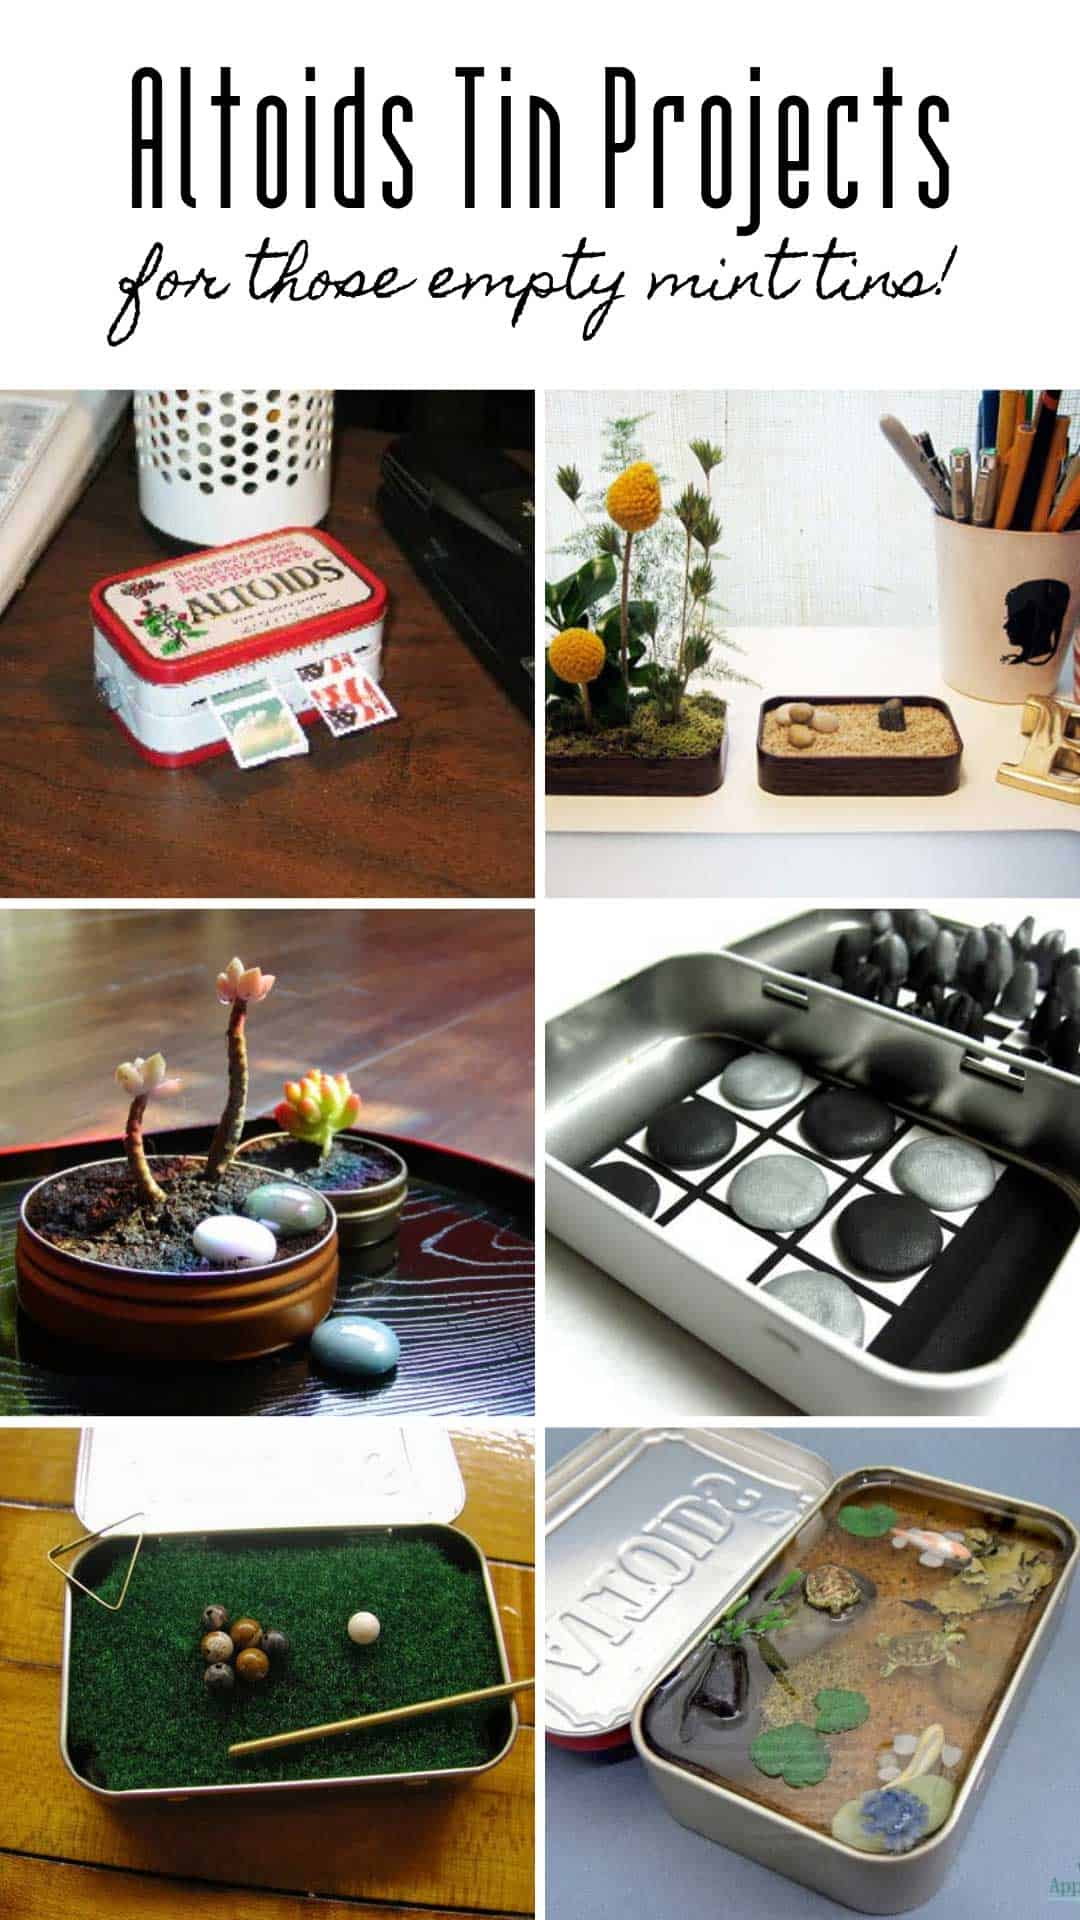 What can you do with an empty altoids tin? So many creative things according to this list! I love the mini pool table, succulent holder and fish pond!